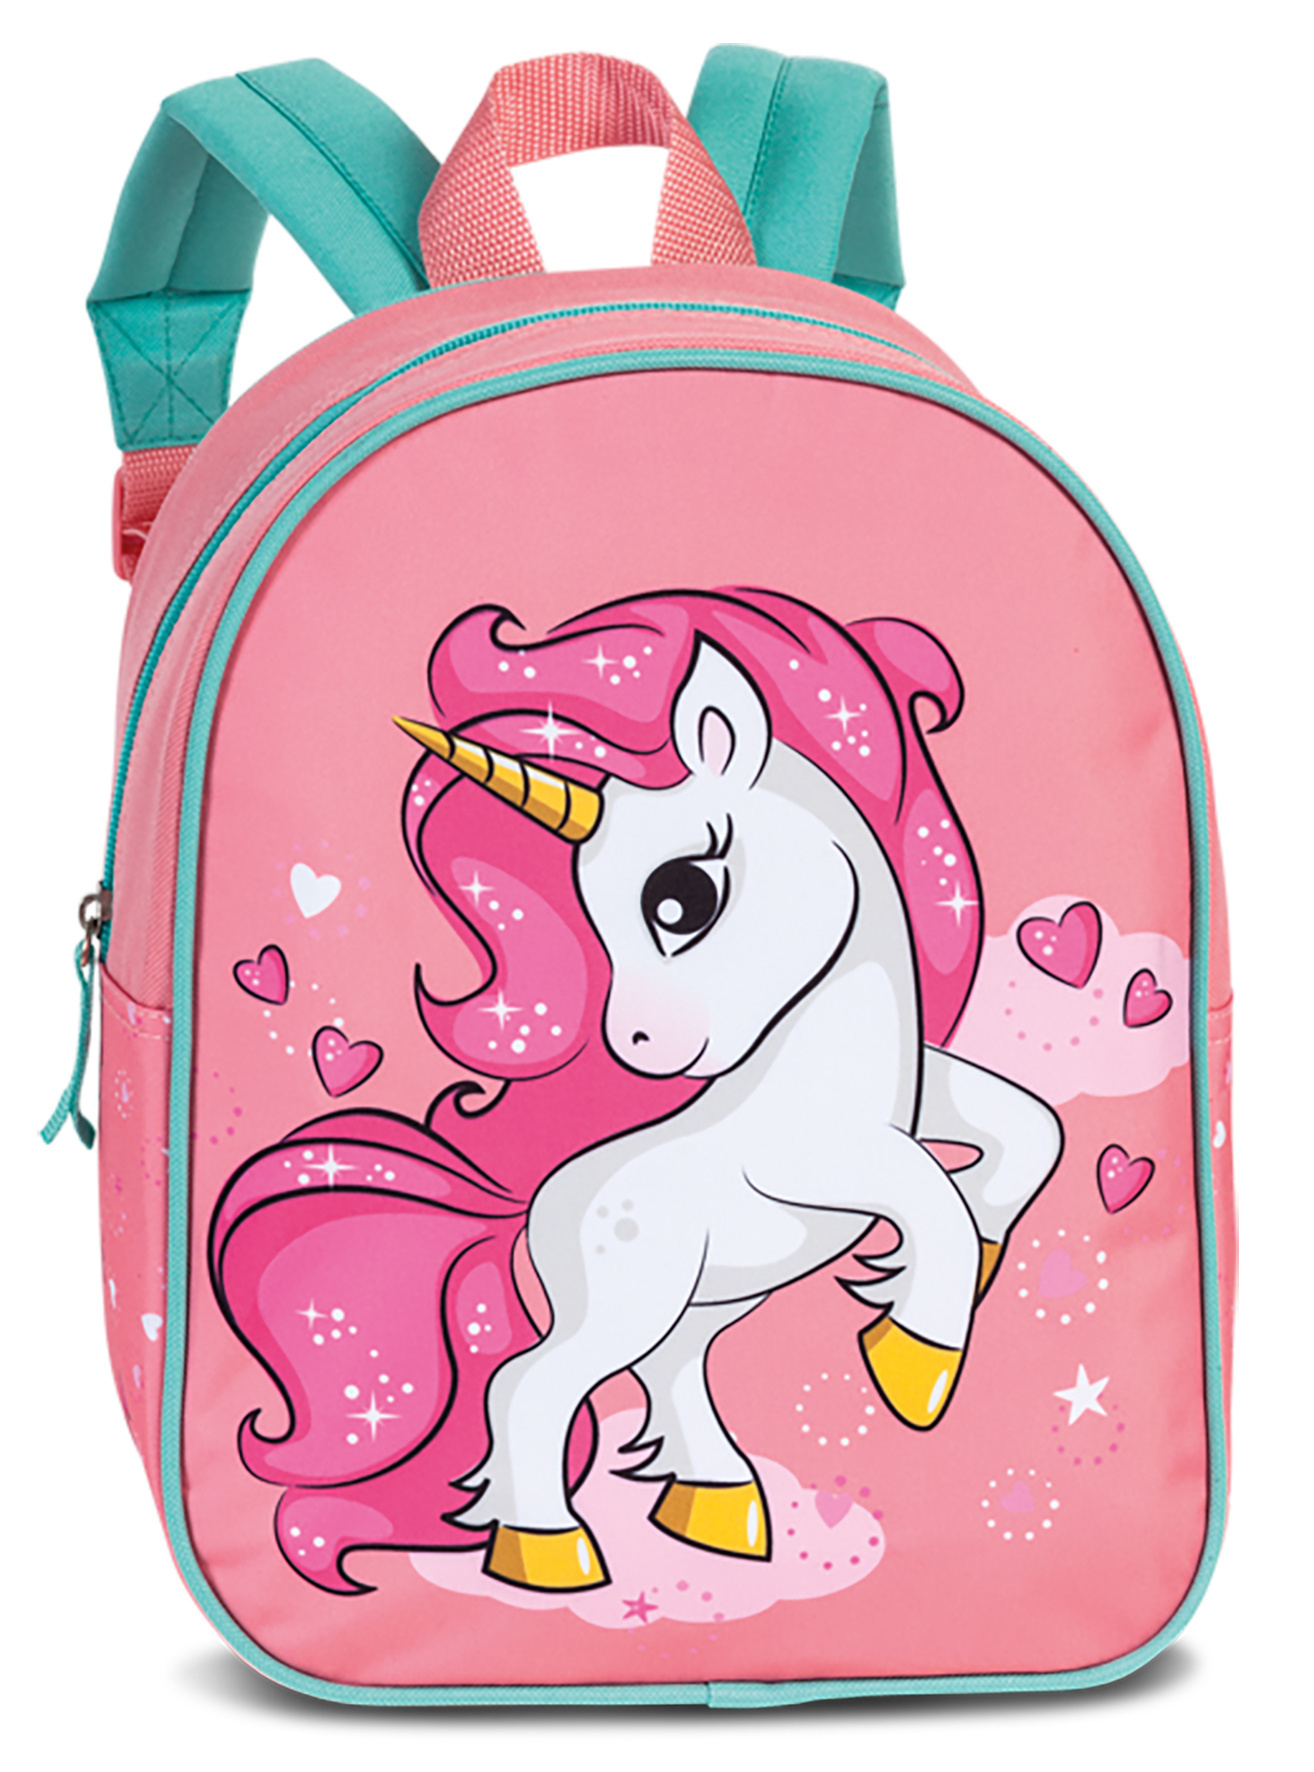 Unicorn Toddler backpack Pink - 29 x 23 x 10 cm - Polyester